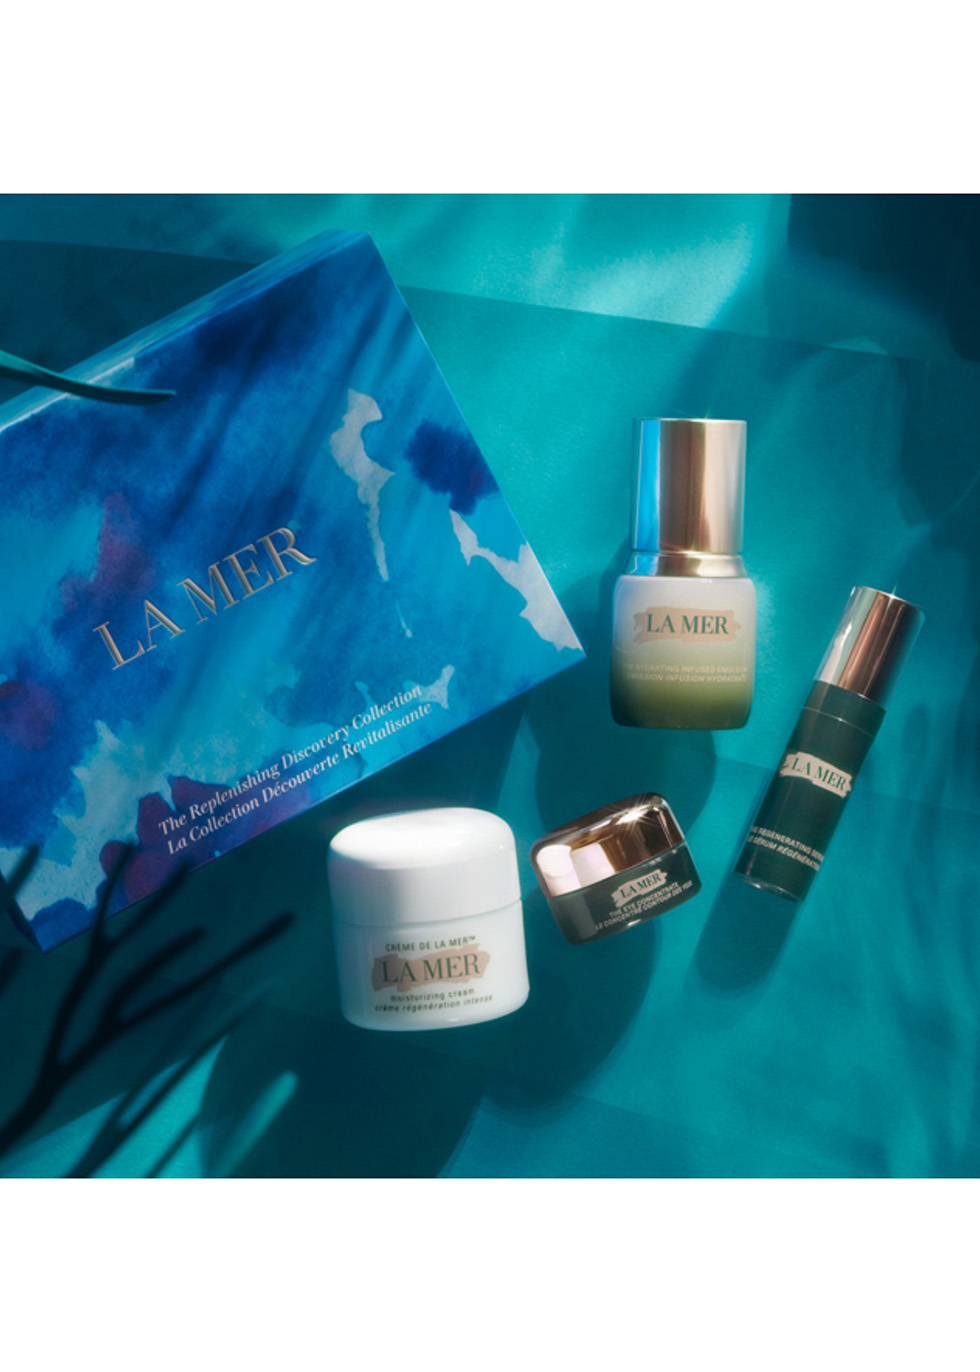 La Mer The Replenishing Discovery Collection - Harvey Nichols